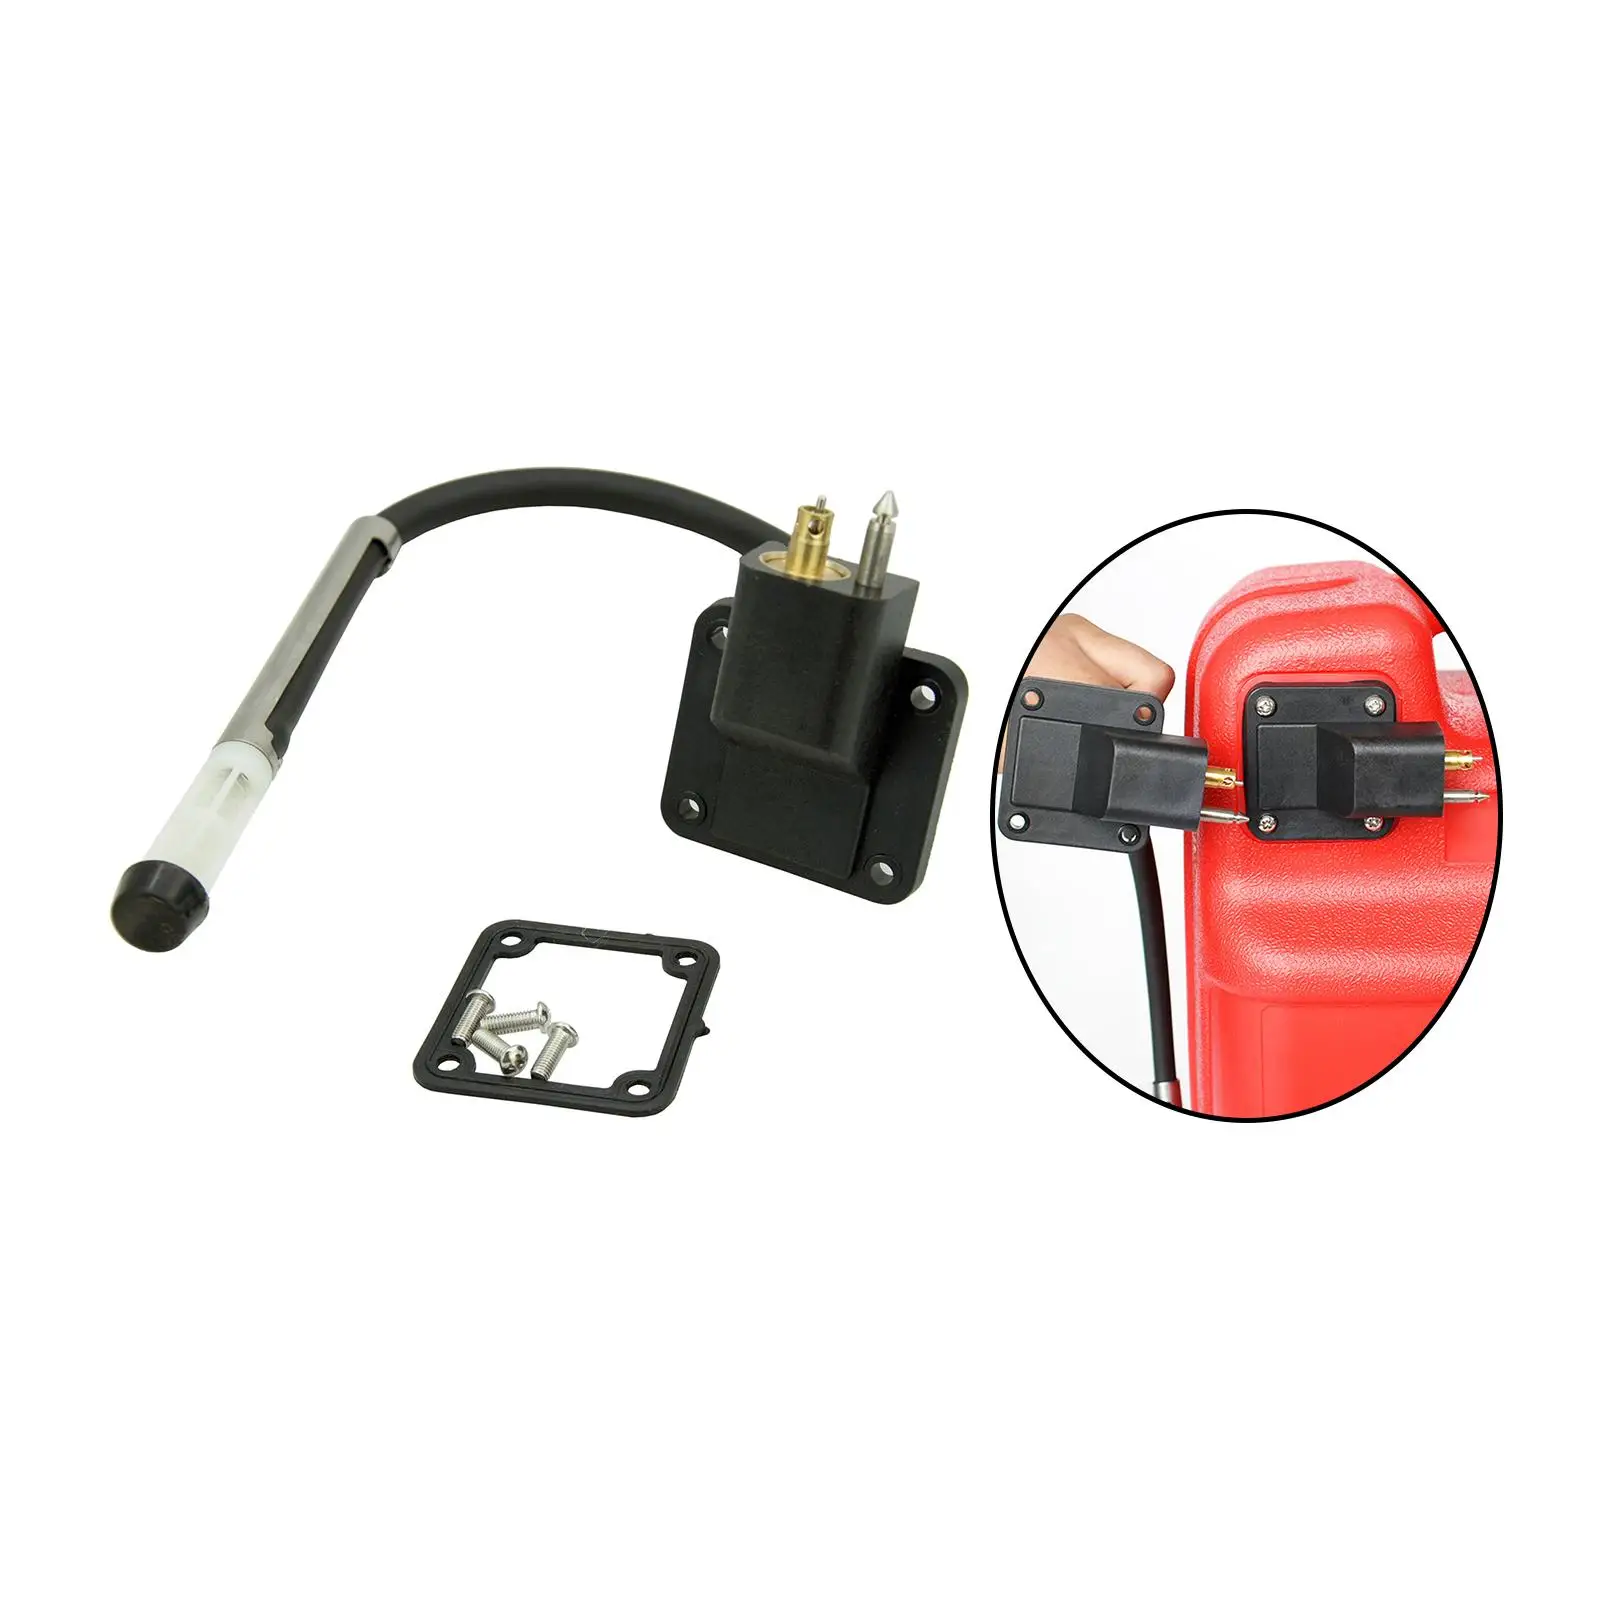 Fuel Tank Connector Fitting with Fuel Meter for Outboard Engine Installation Durable